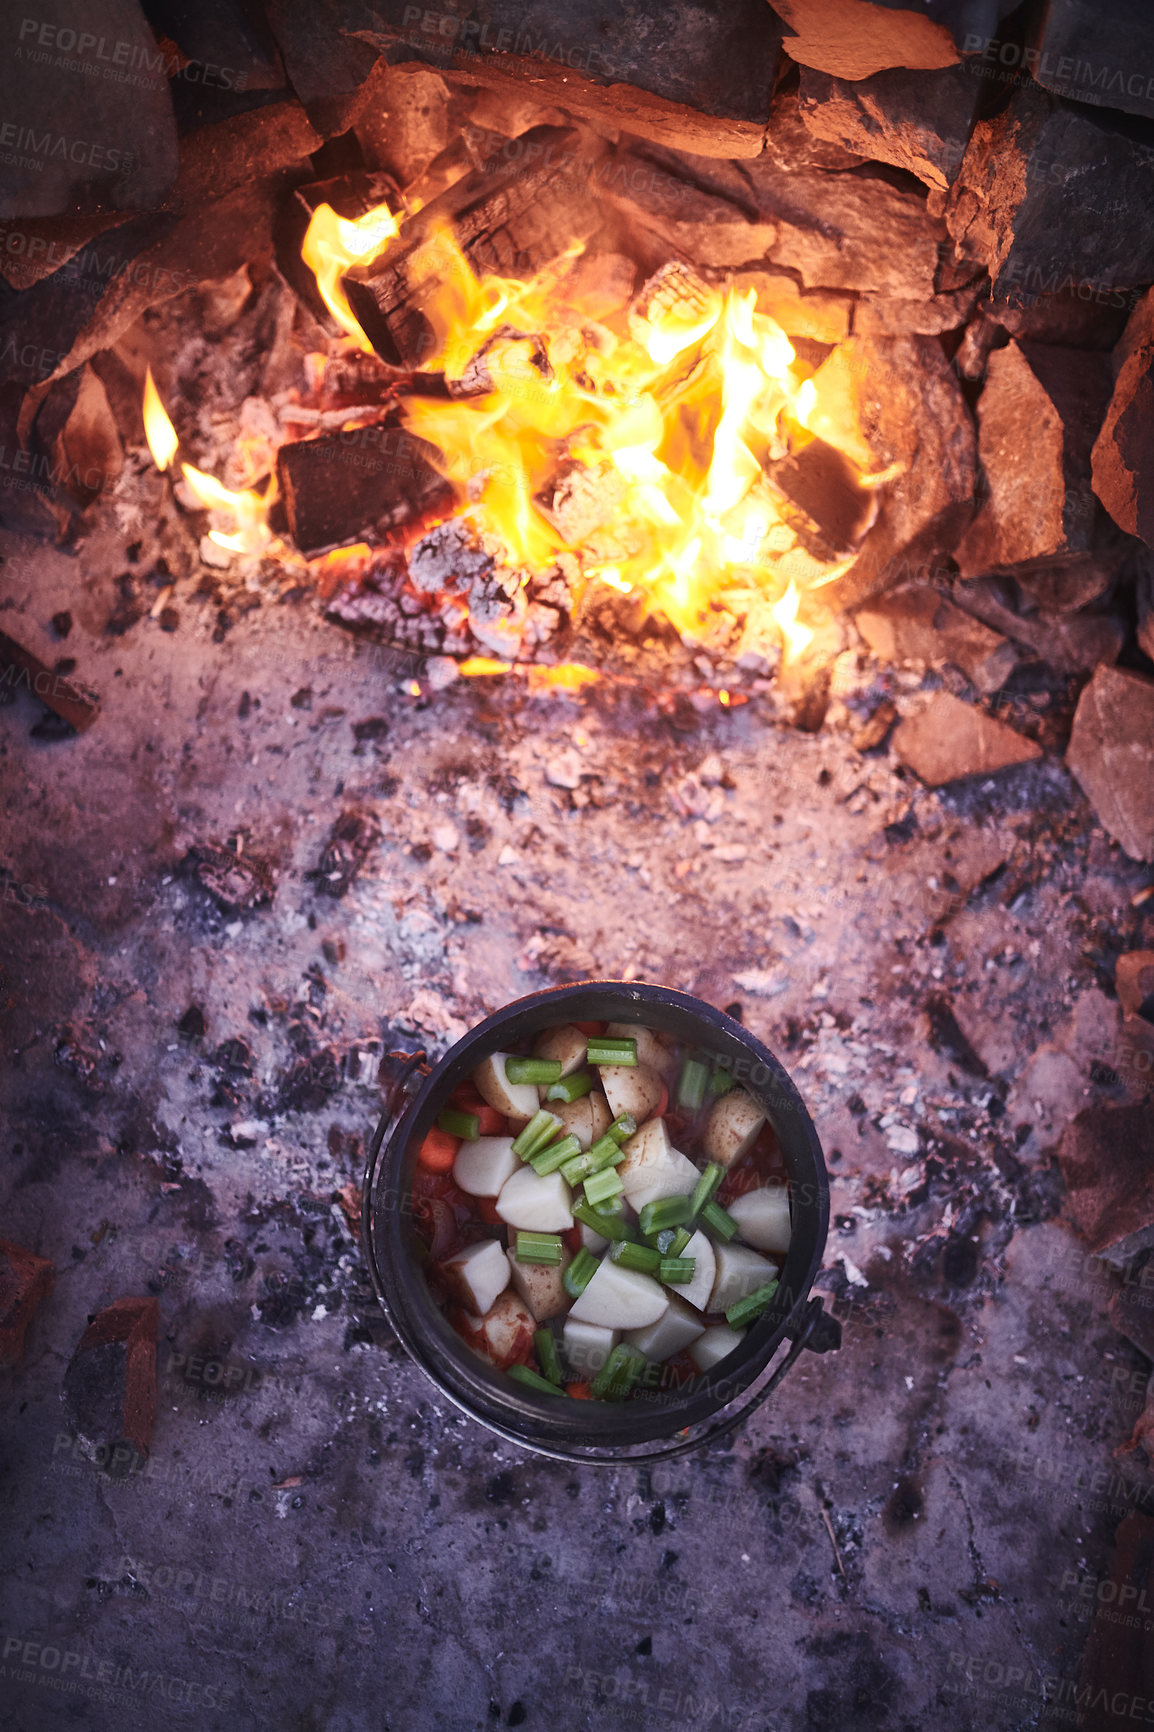 Buy stock photo Shot of a traditional South African food being cooked by campfire outdoors